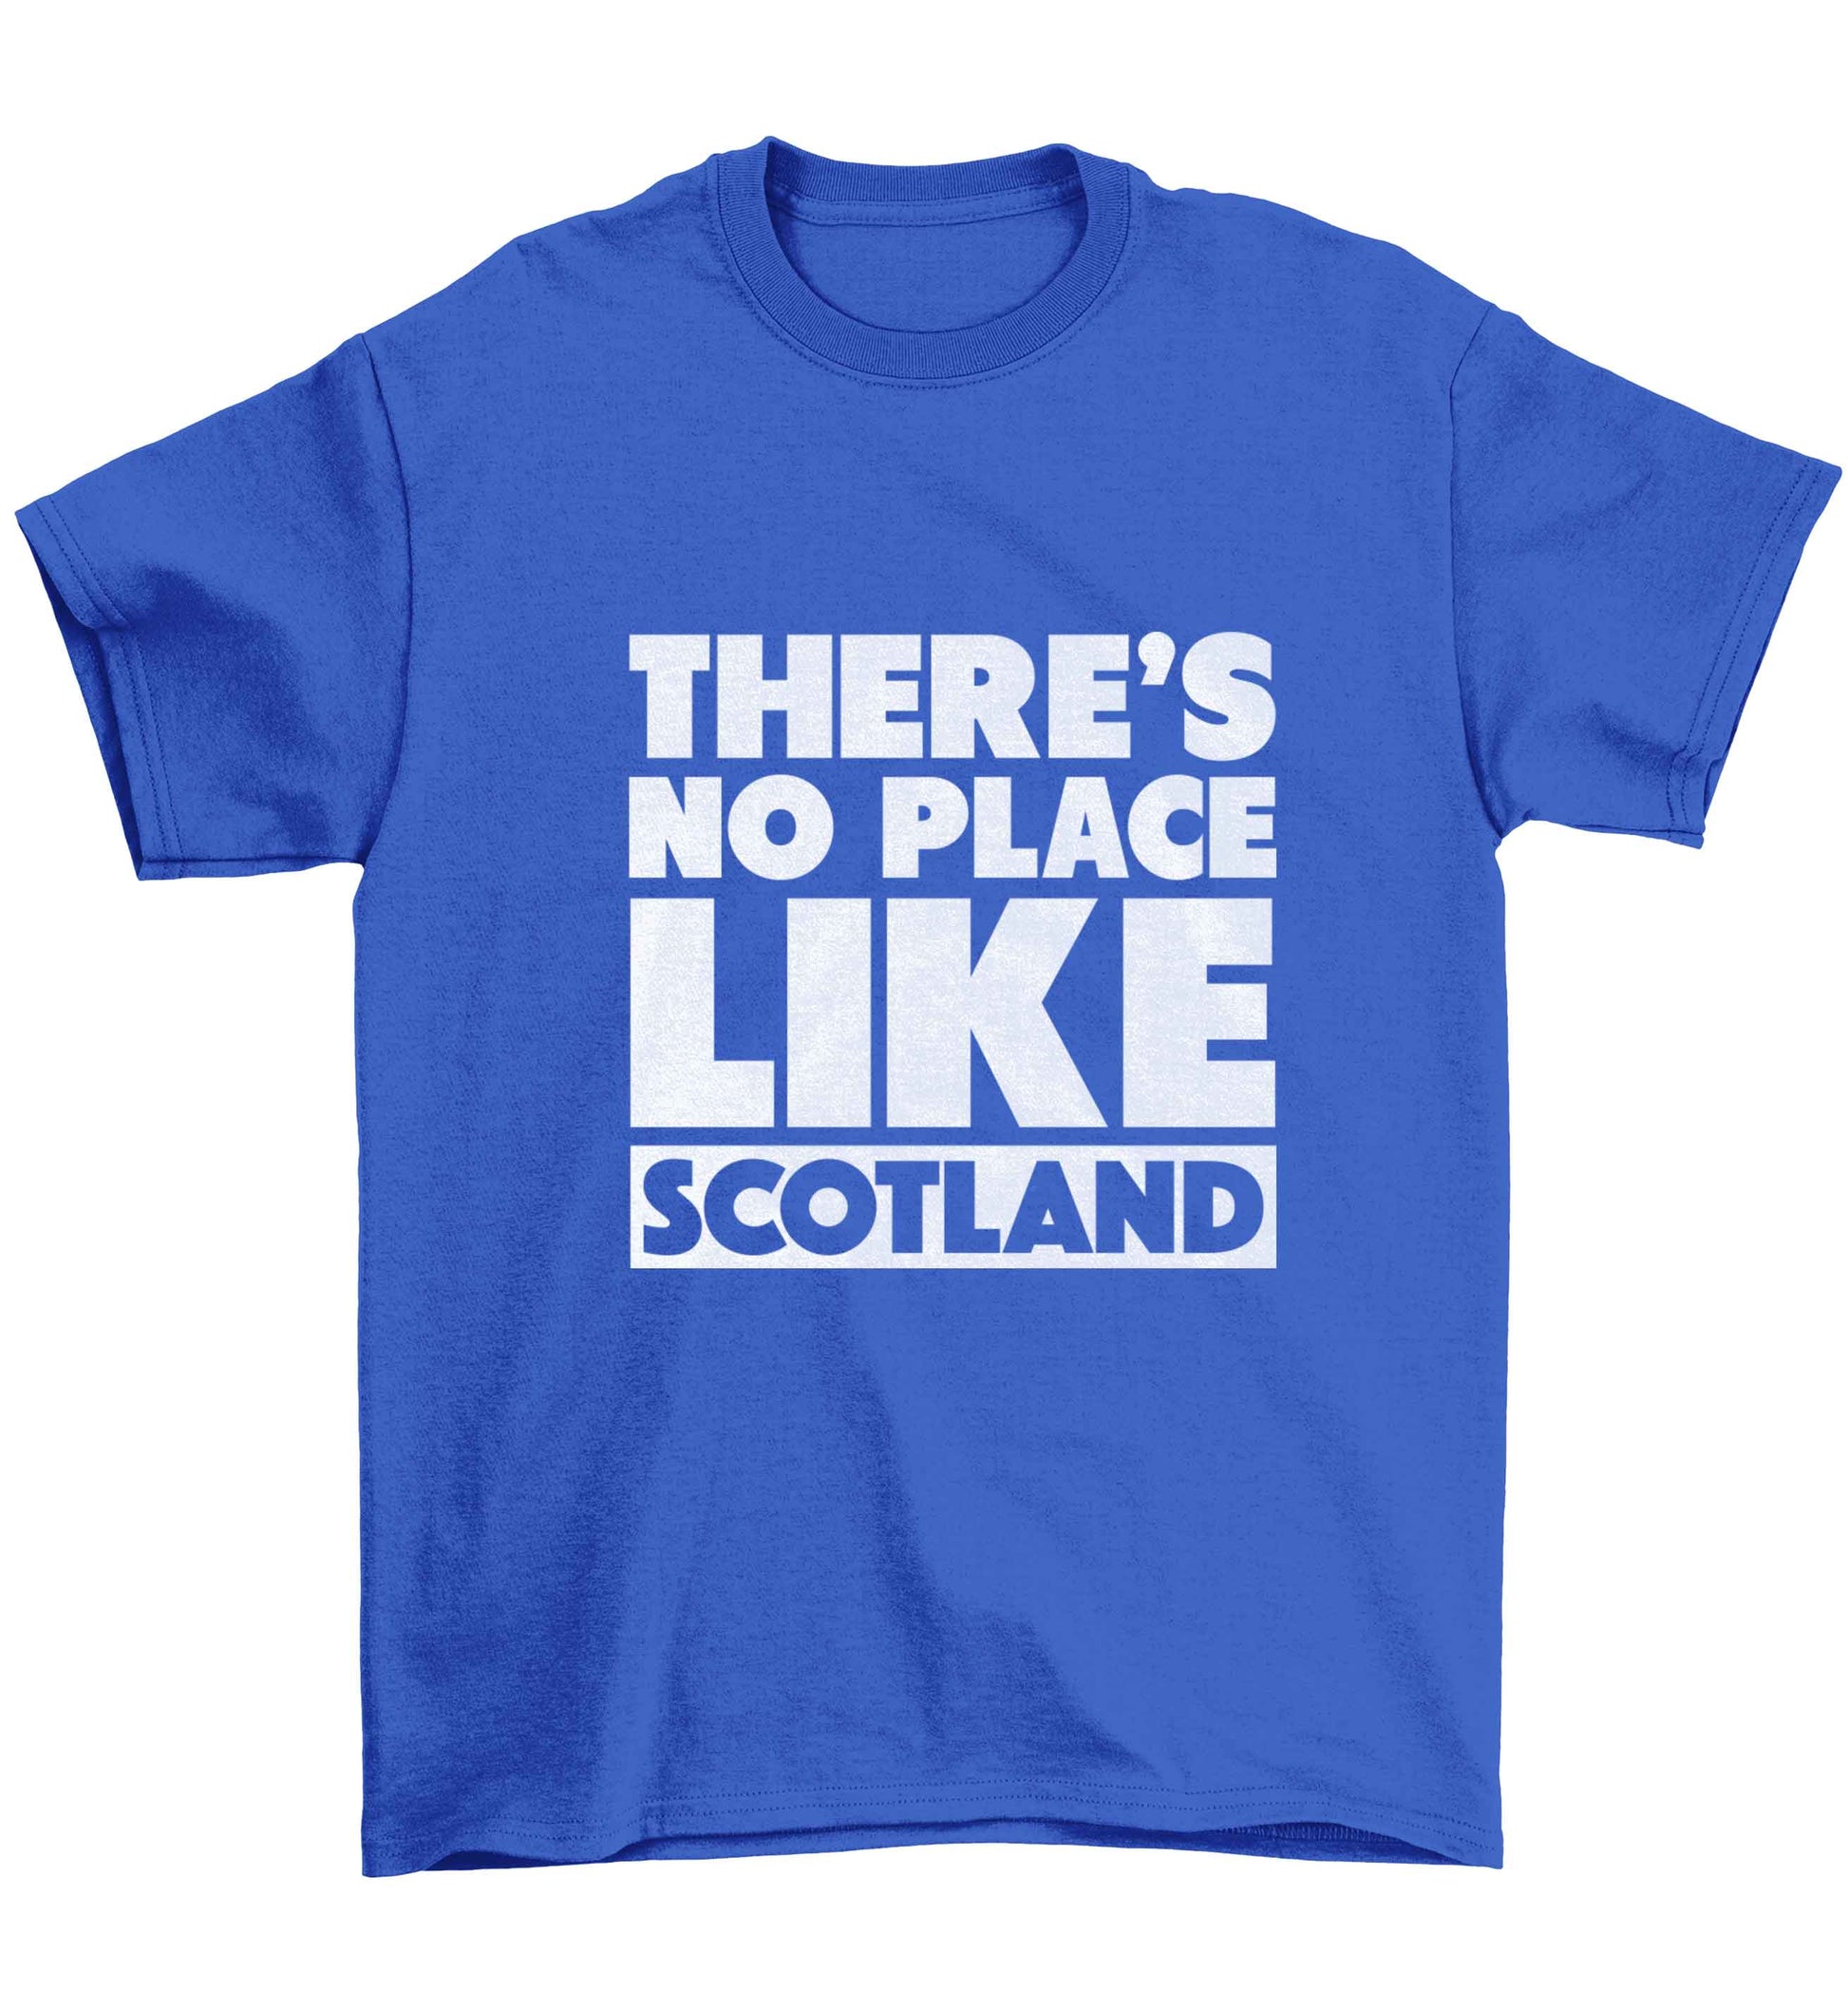 There's no place like Scotland Children's blue Tshirt 12-13 Years